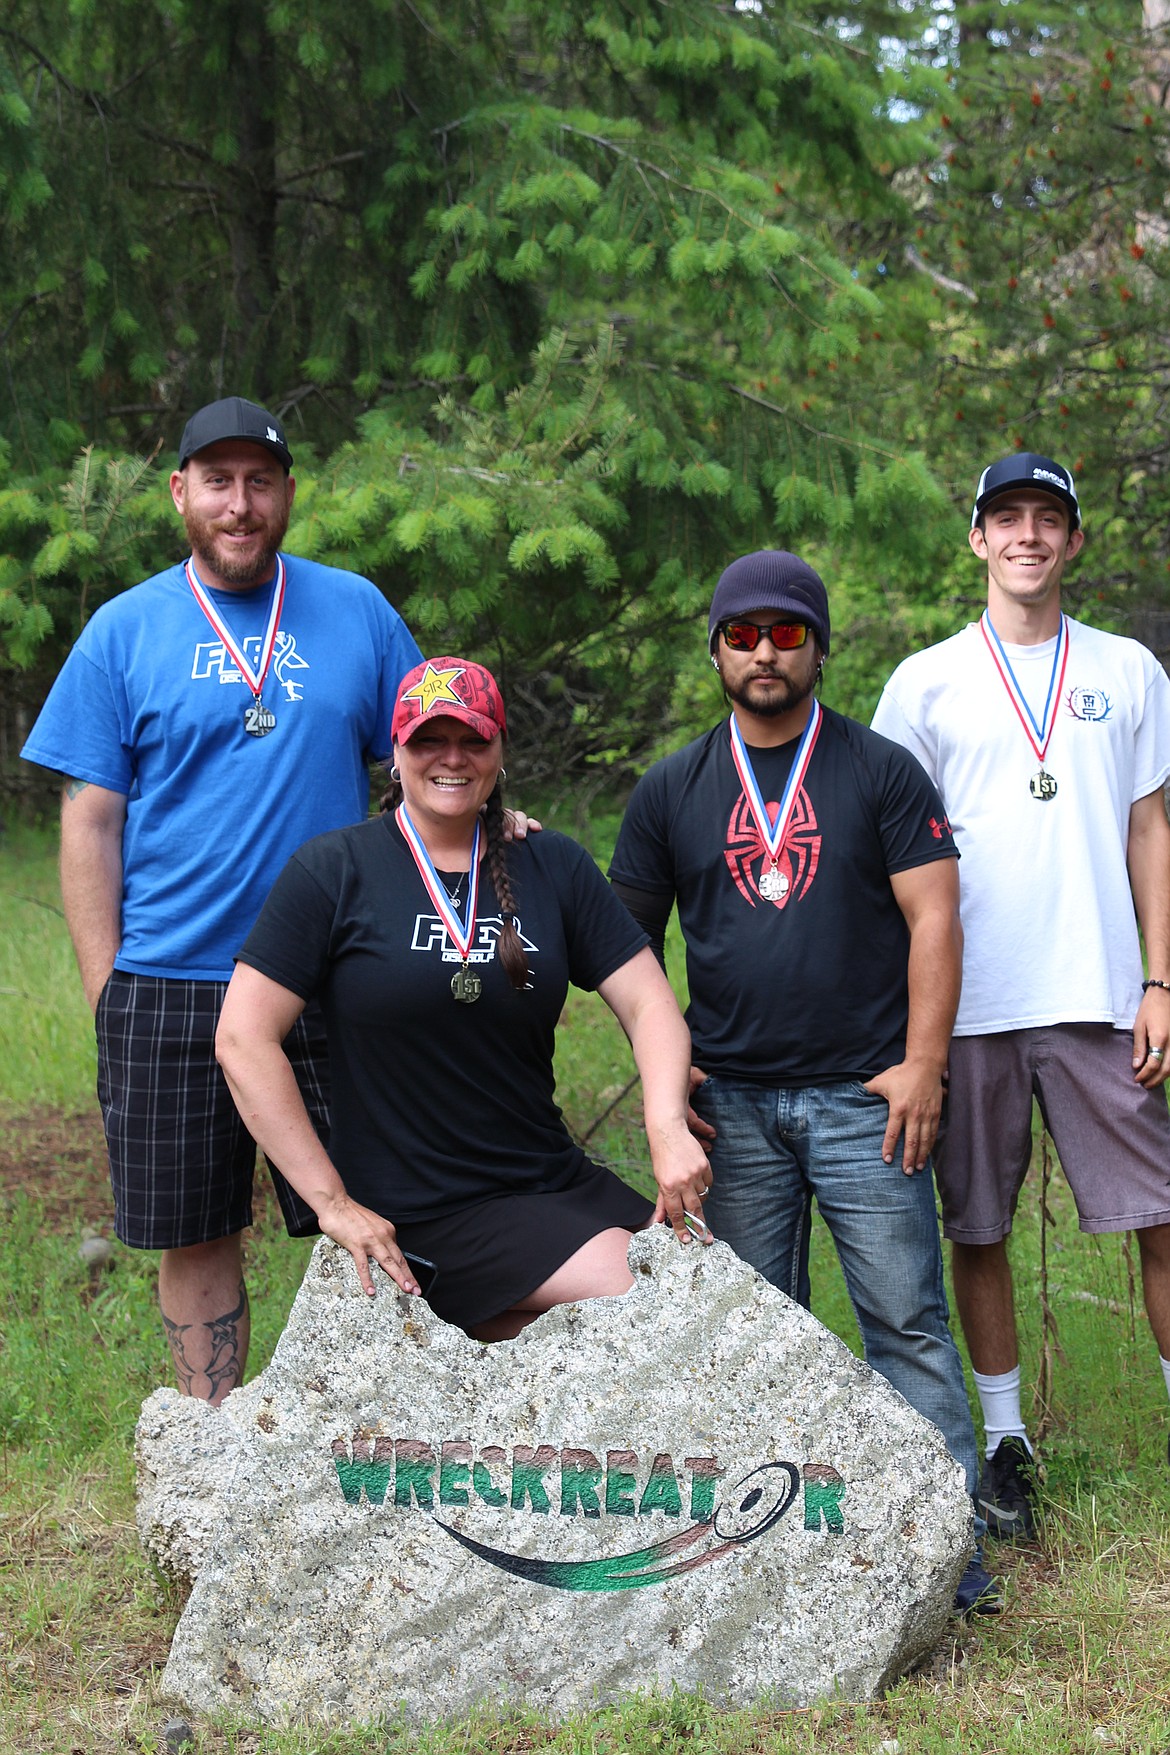 Courtesy photo
Jason Petersen, Dani Petersen, Tim Gisel and Sterling West all won medals for competing in the intermediate division at the last Farragut Fling.